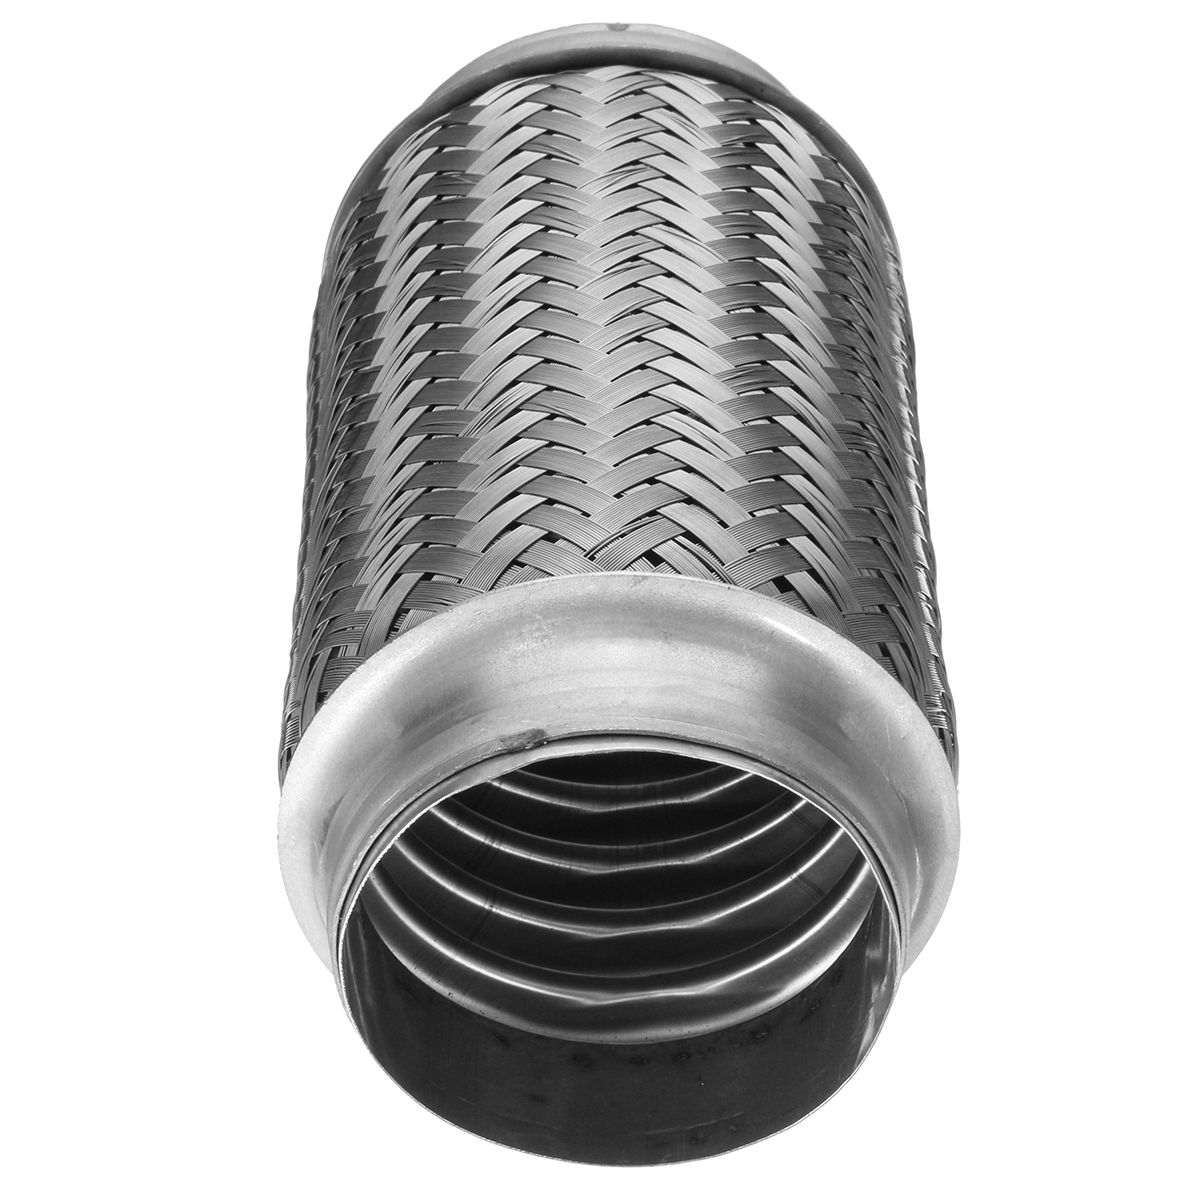 3x8-Inch-Flex-Pipe-Exhaust-Stainless-Steel-Double-Braid-Heavy-Duty-Coupling-Tube-1251545